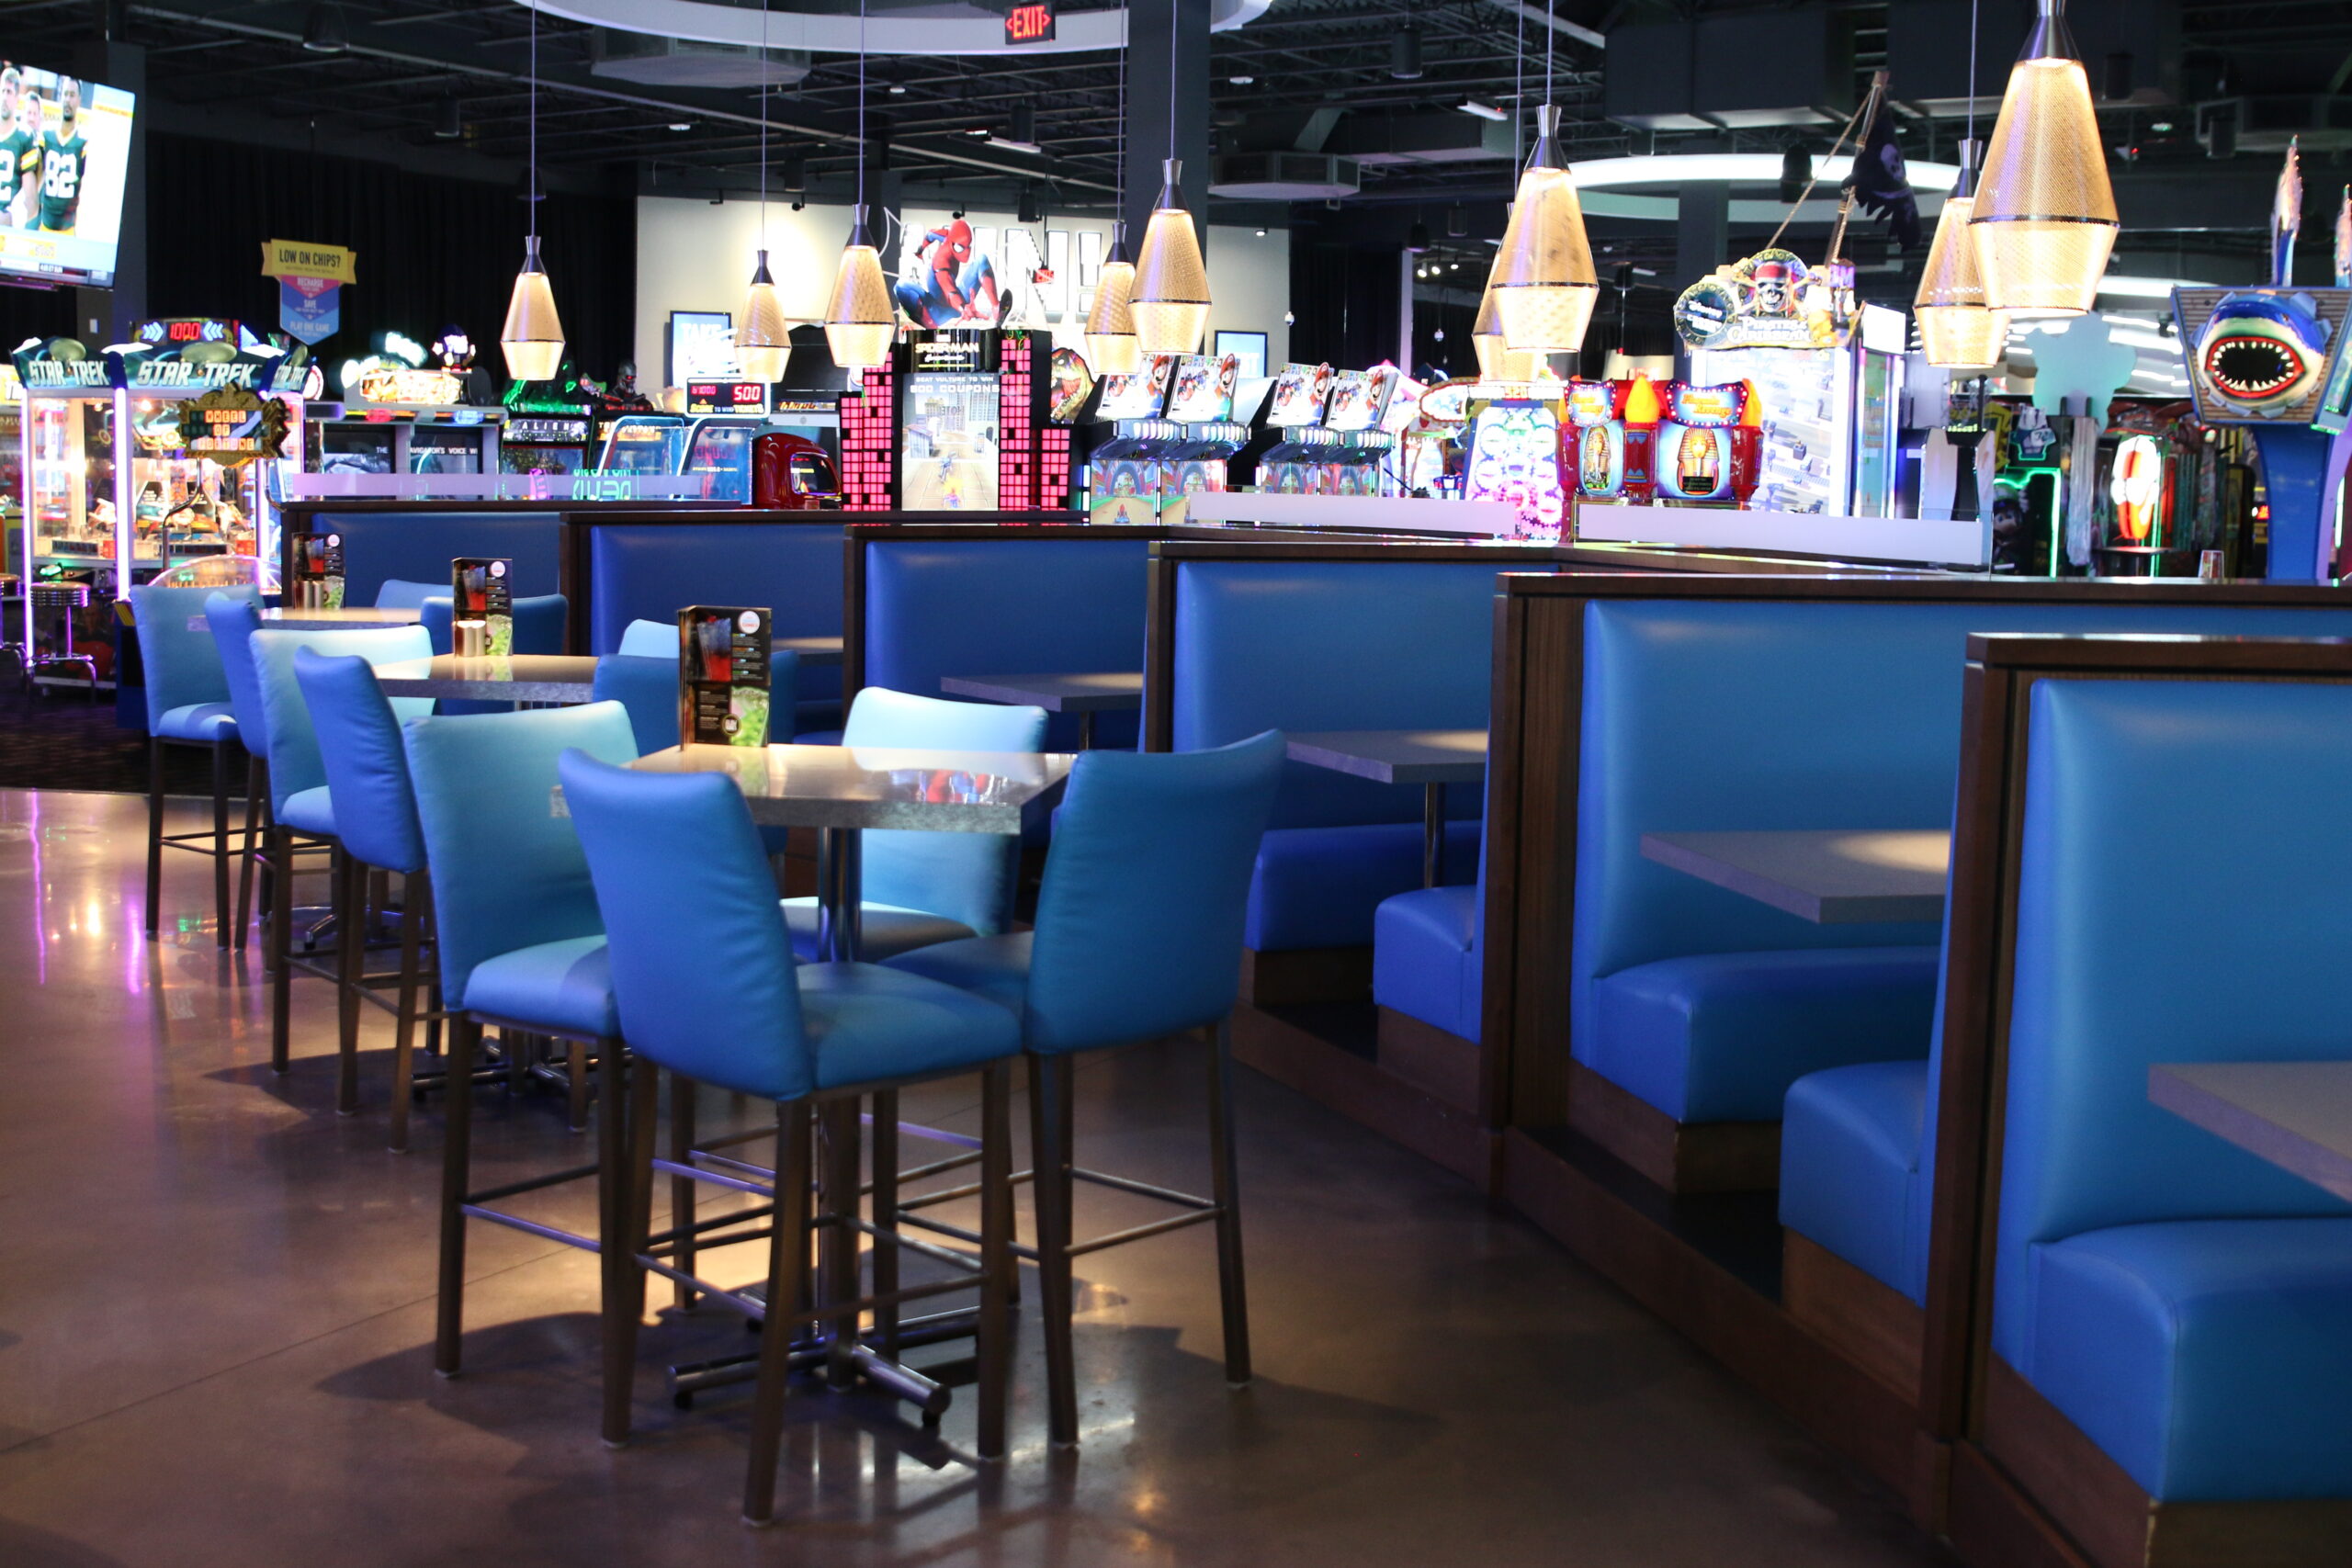 Dave & Buster’s Myrtle Beach